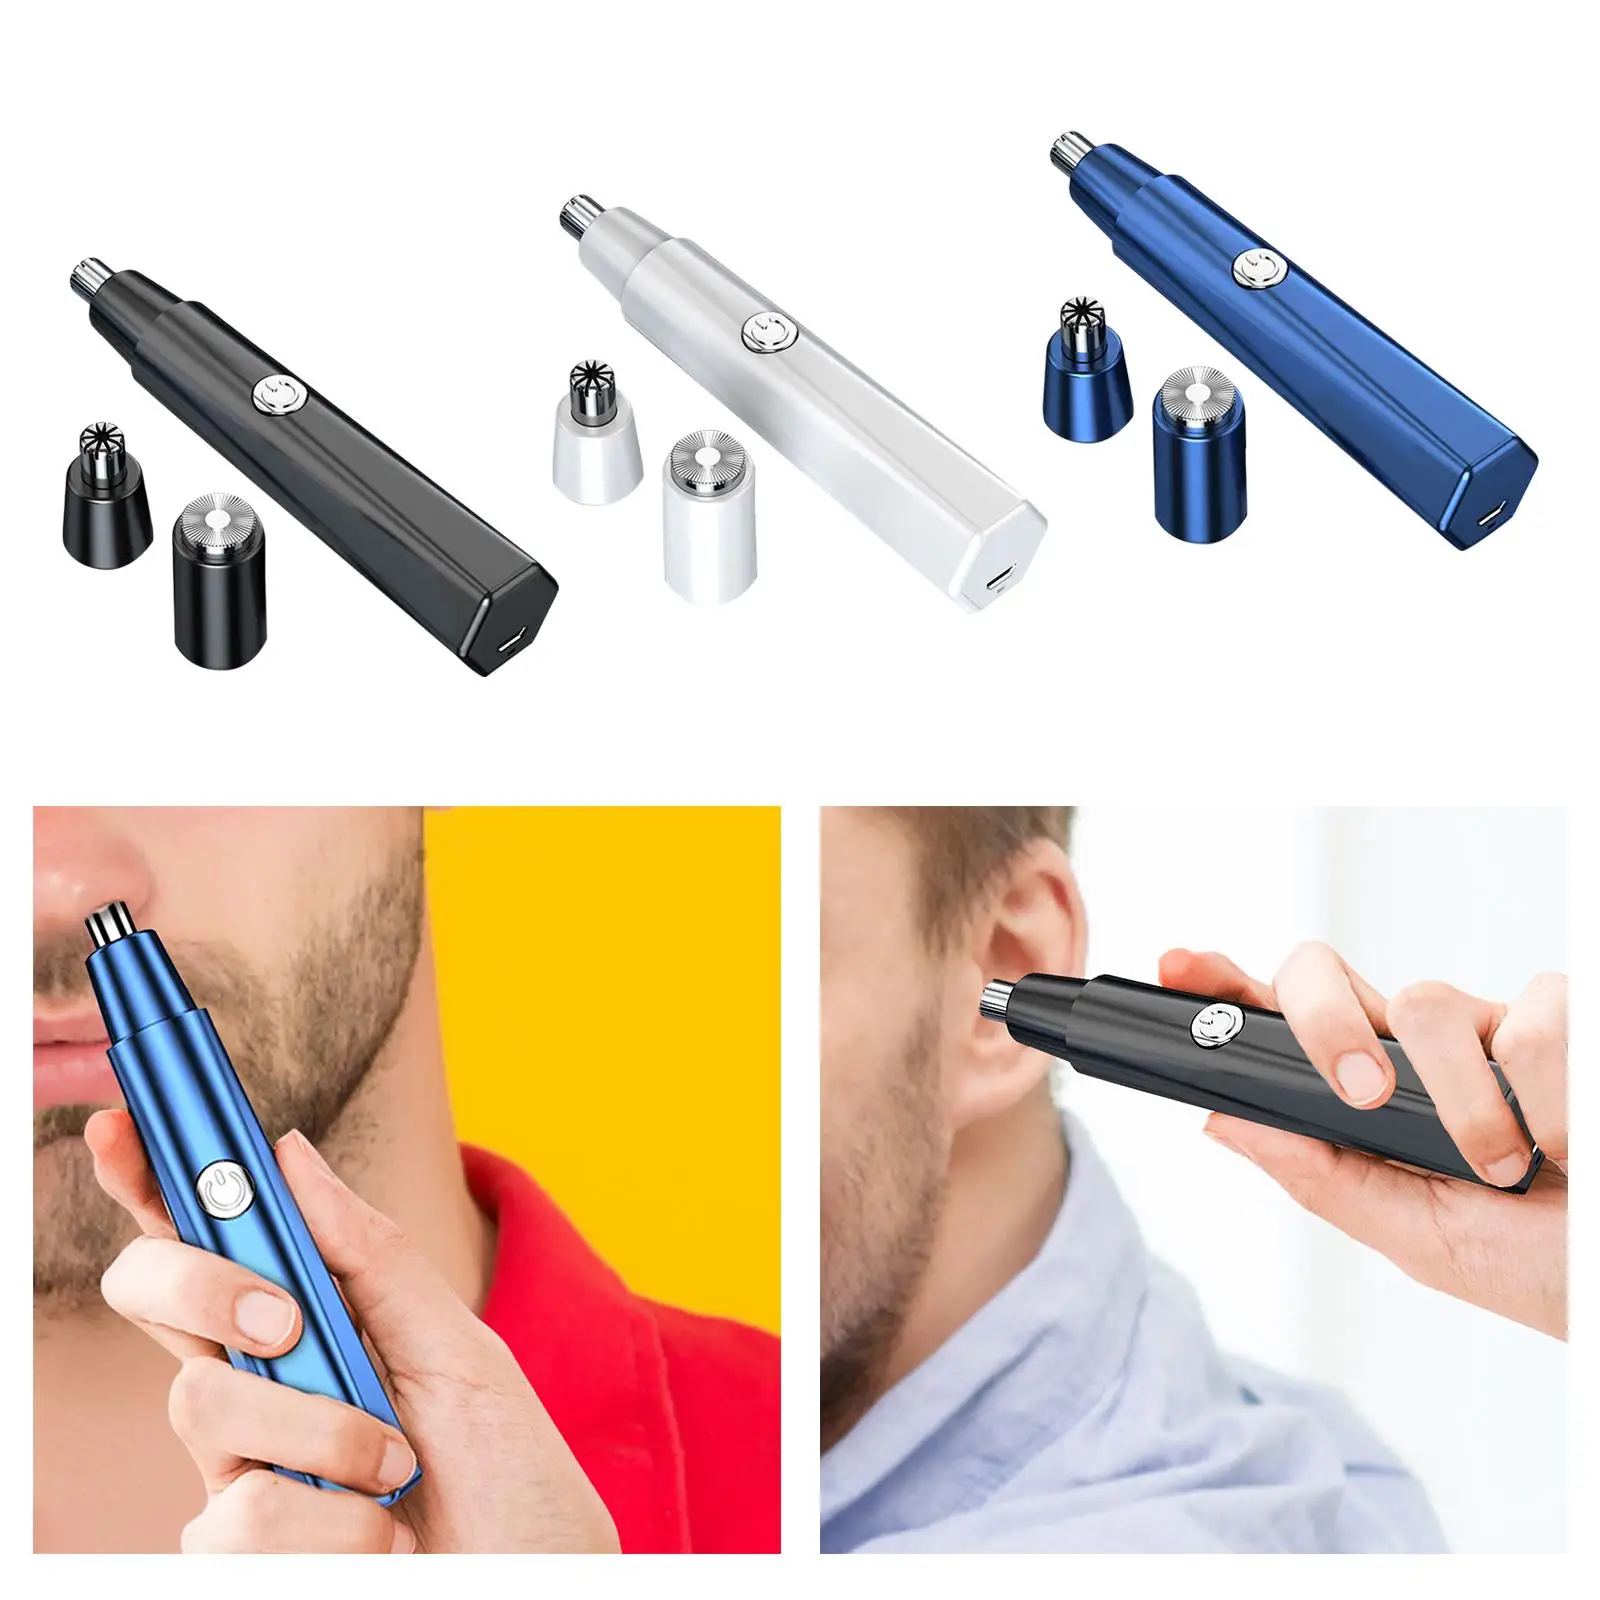 Portable Ear Nose Hair Trimmer IPX5 Waterproof Washable Heads Groomer Men`s Shaver Clipper Eyebrow & Facial Hair Trimmer